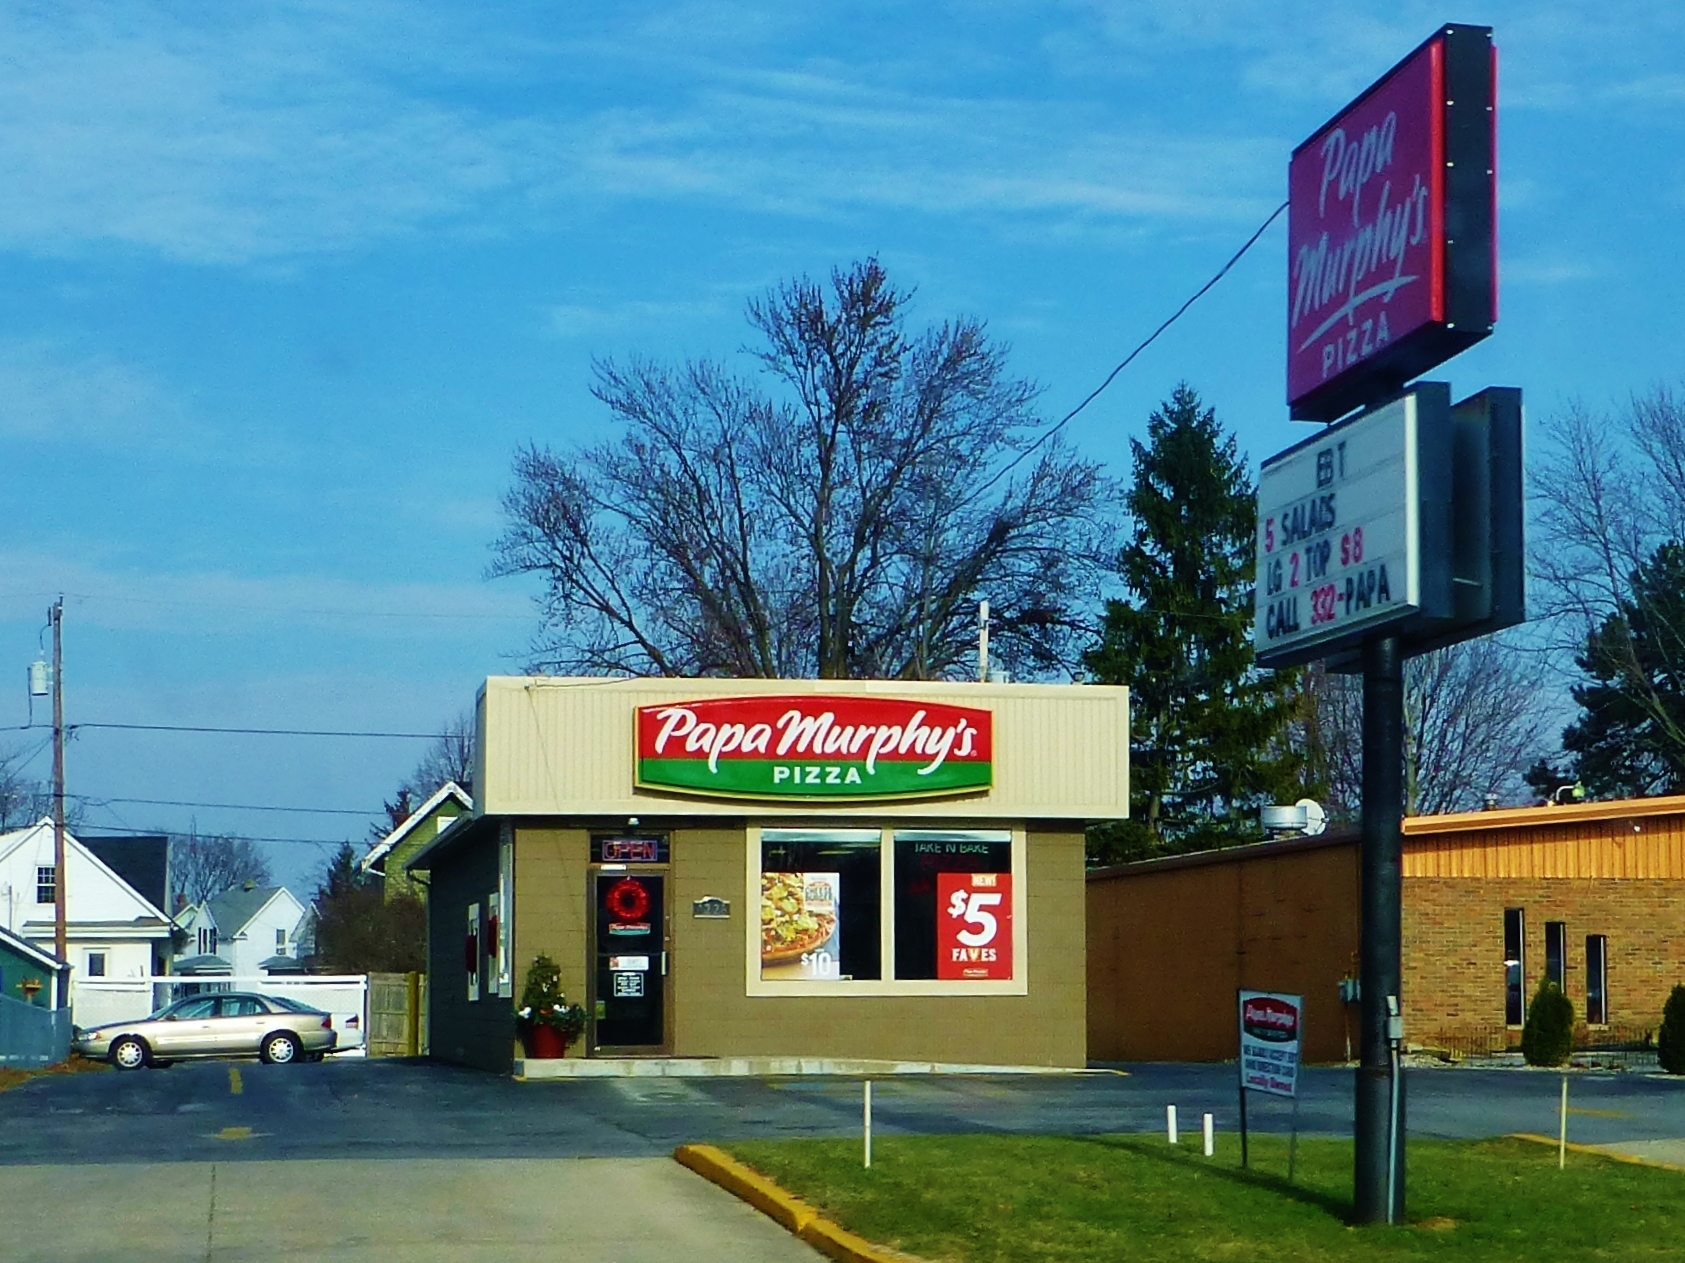 Papa Murphy's is a chain that sells take-and-bake pizza. It built its name on low prices, and a willingness to accept food stamps. But now that may be in jeopardy. Photo: Nicholas Eckhart/Flickr